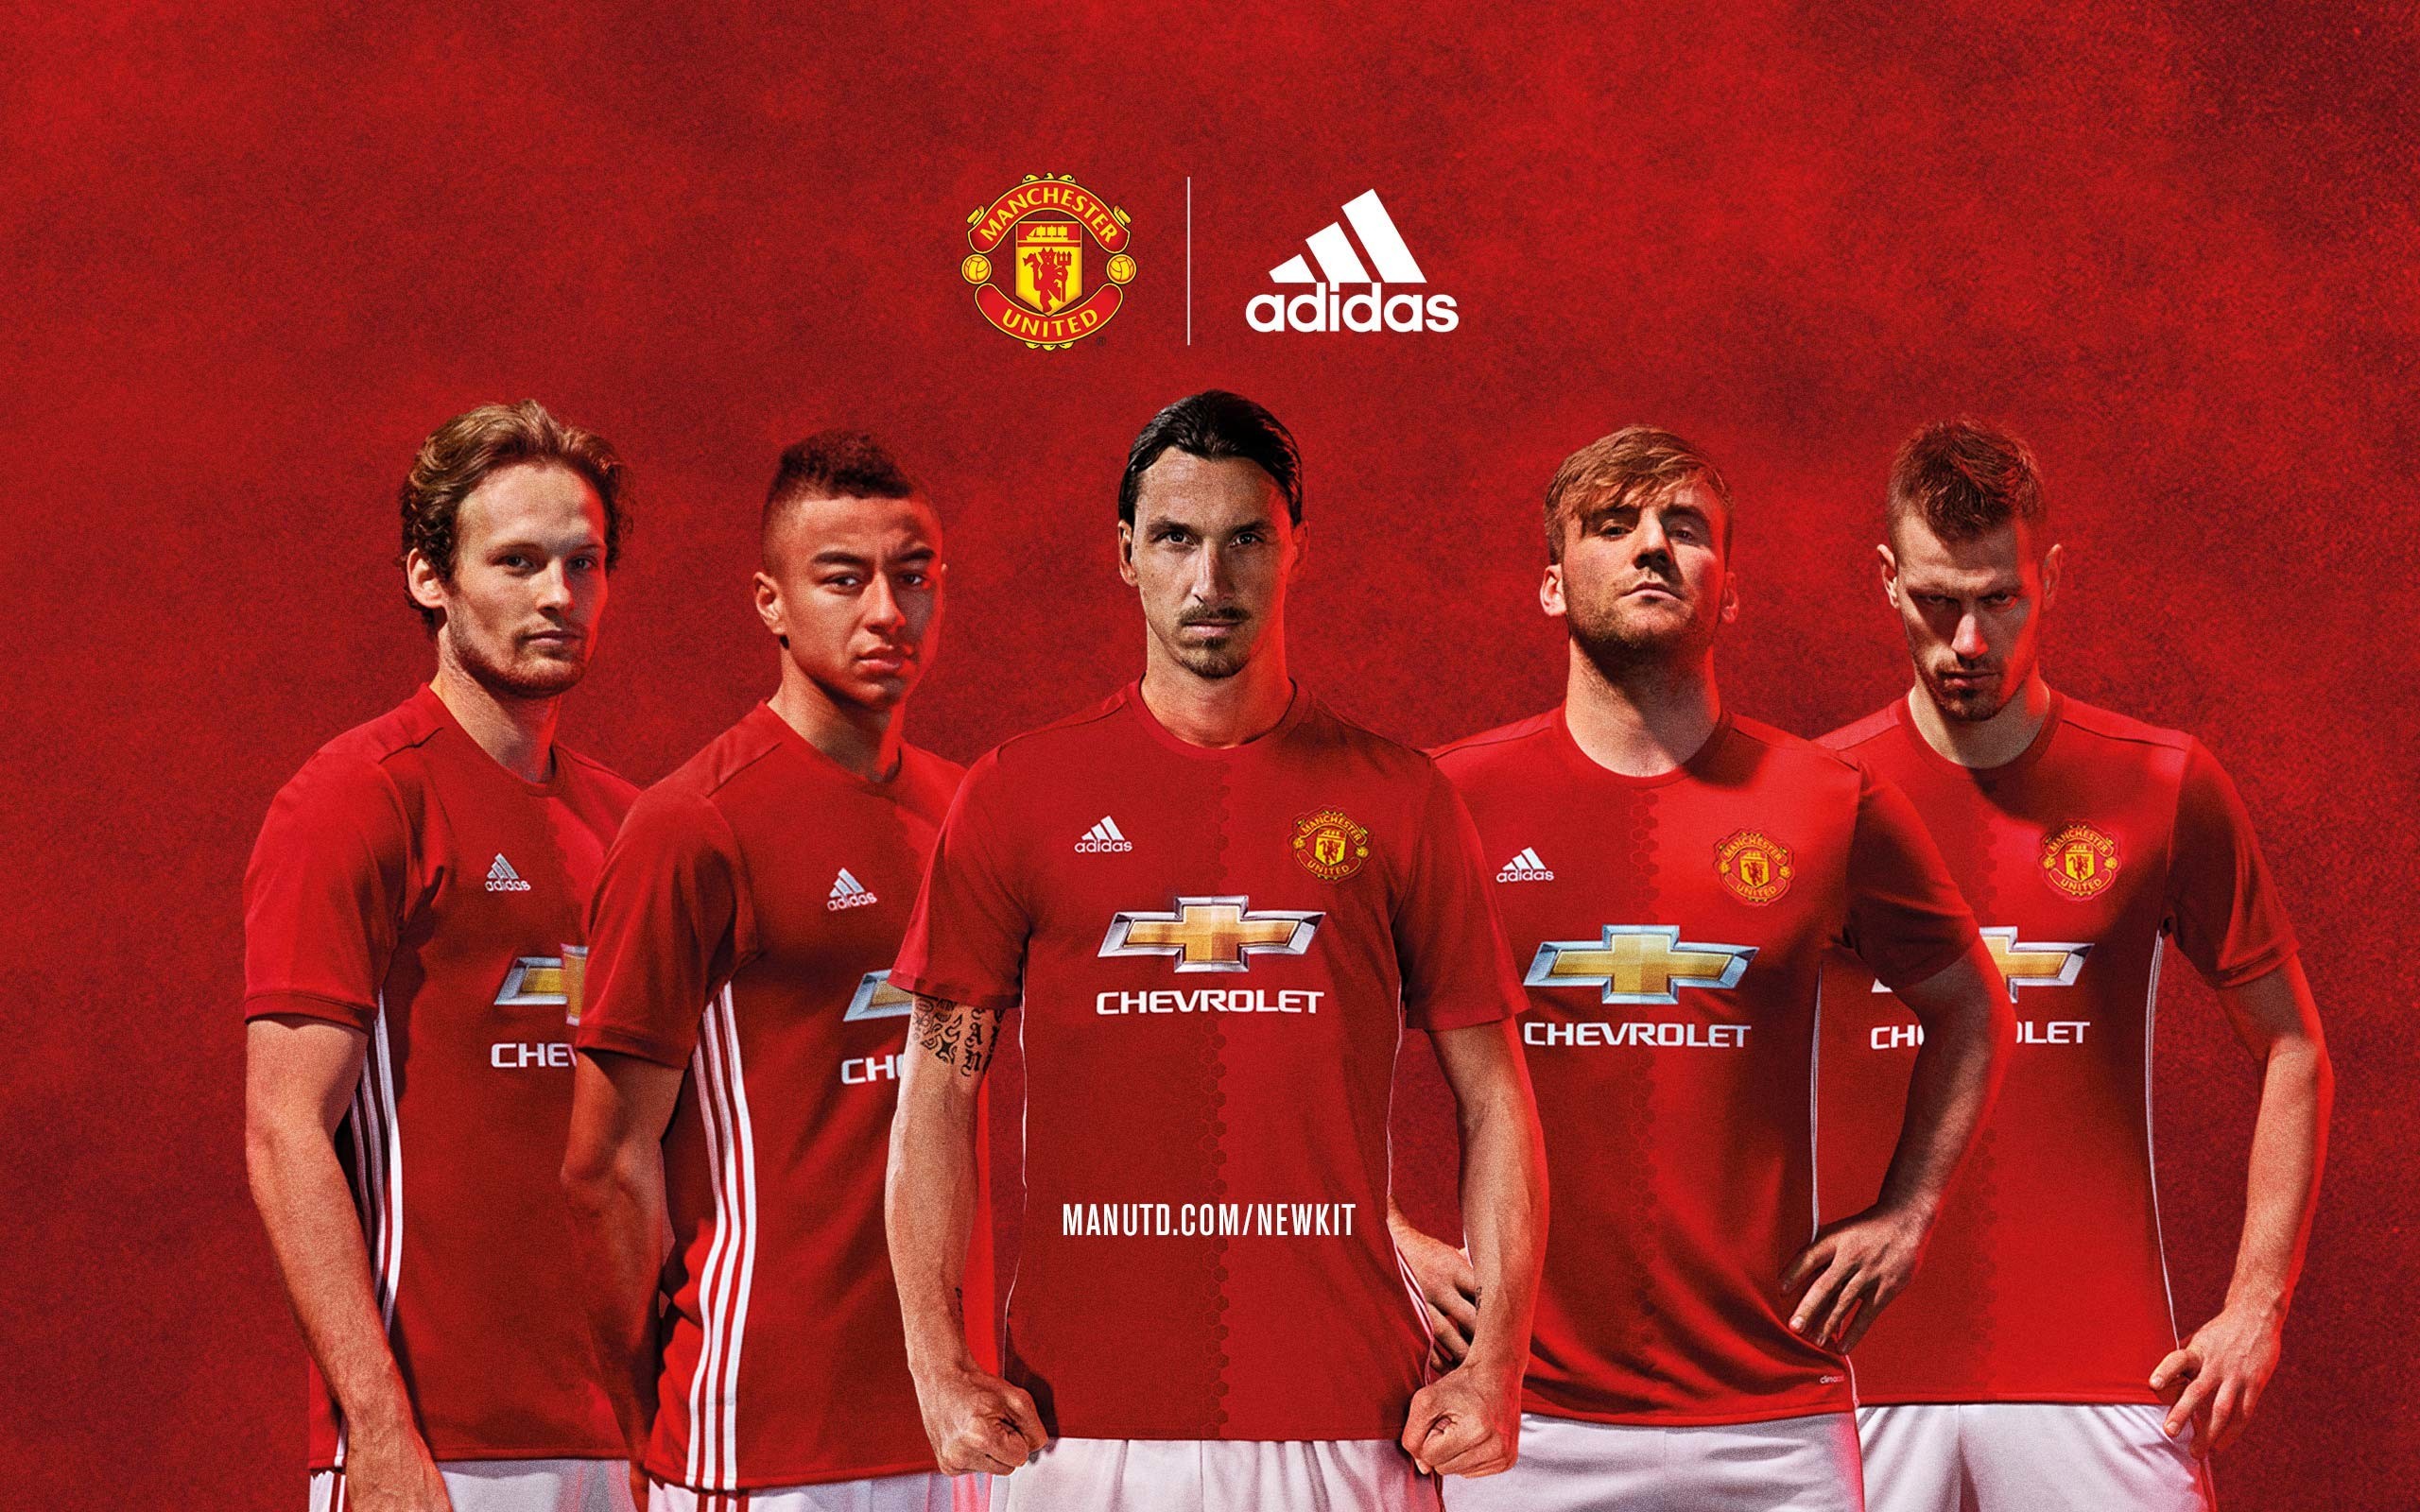 hinh nen manchester united 35 - wallpaper free download